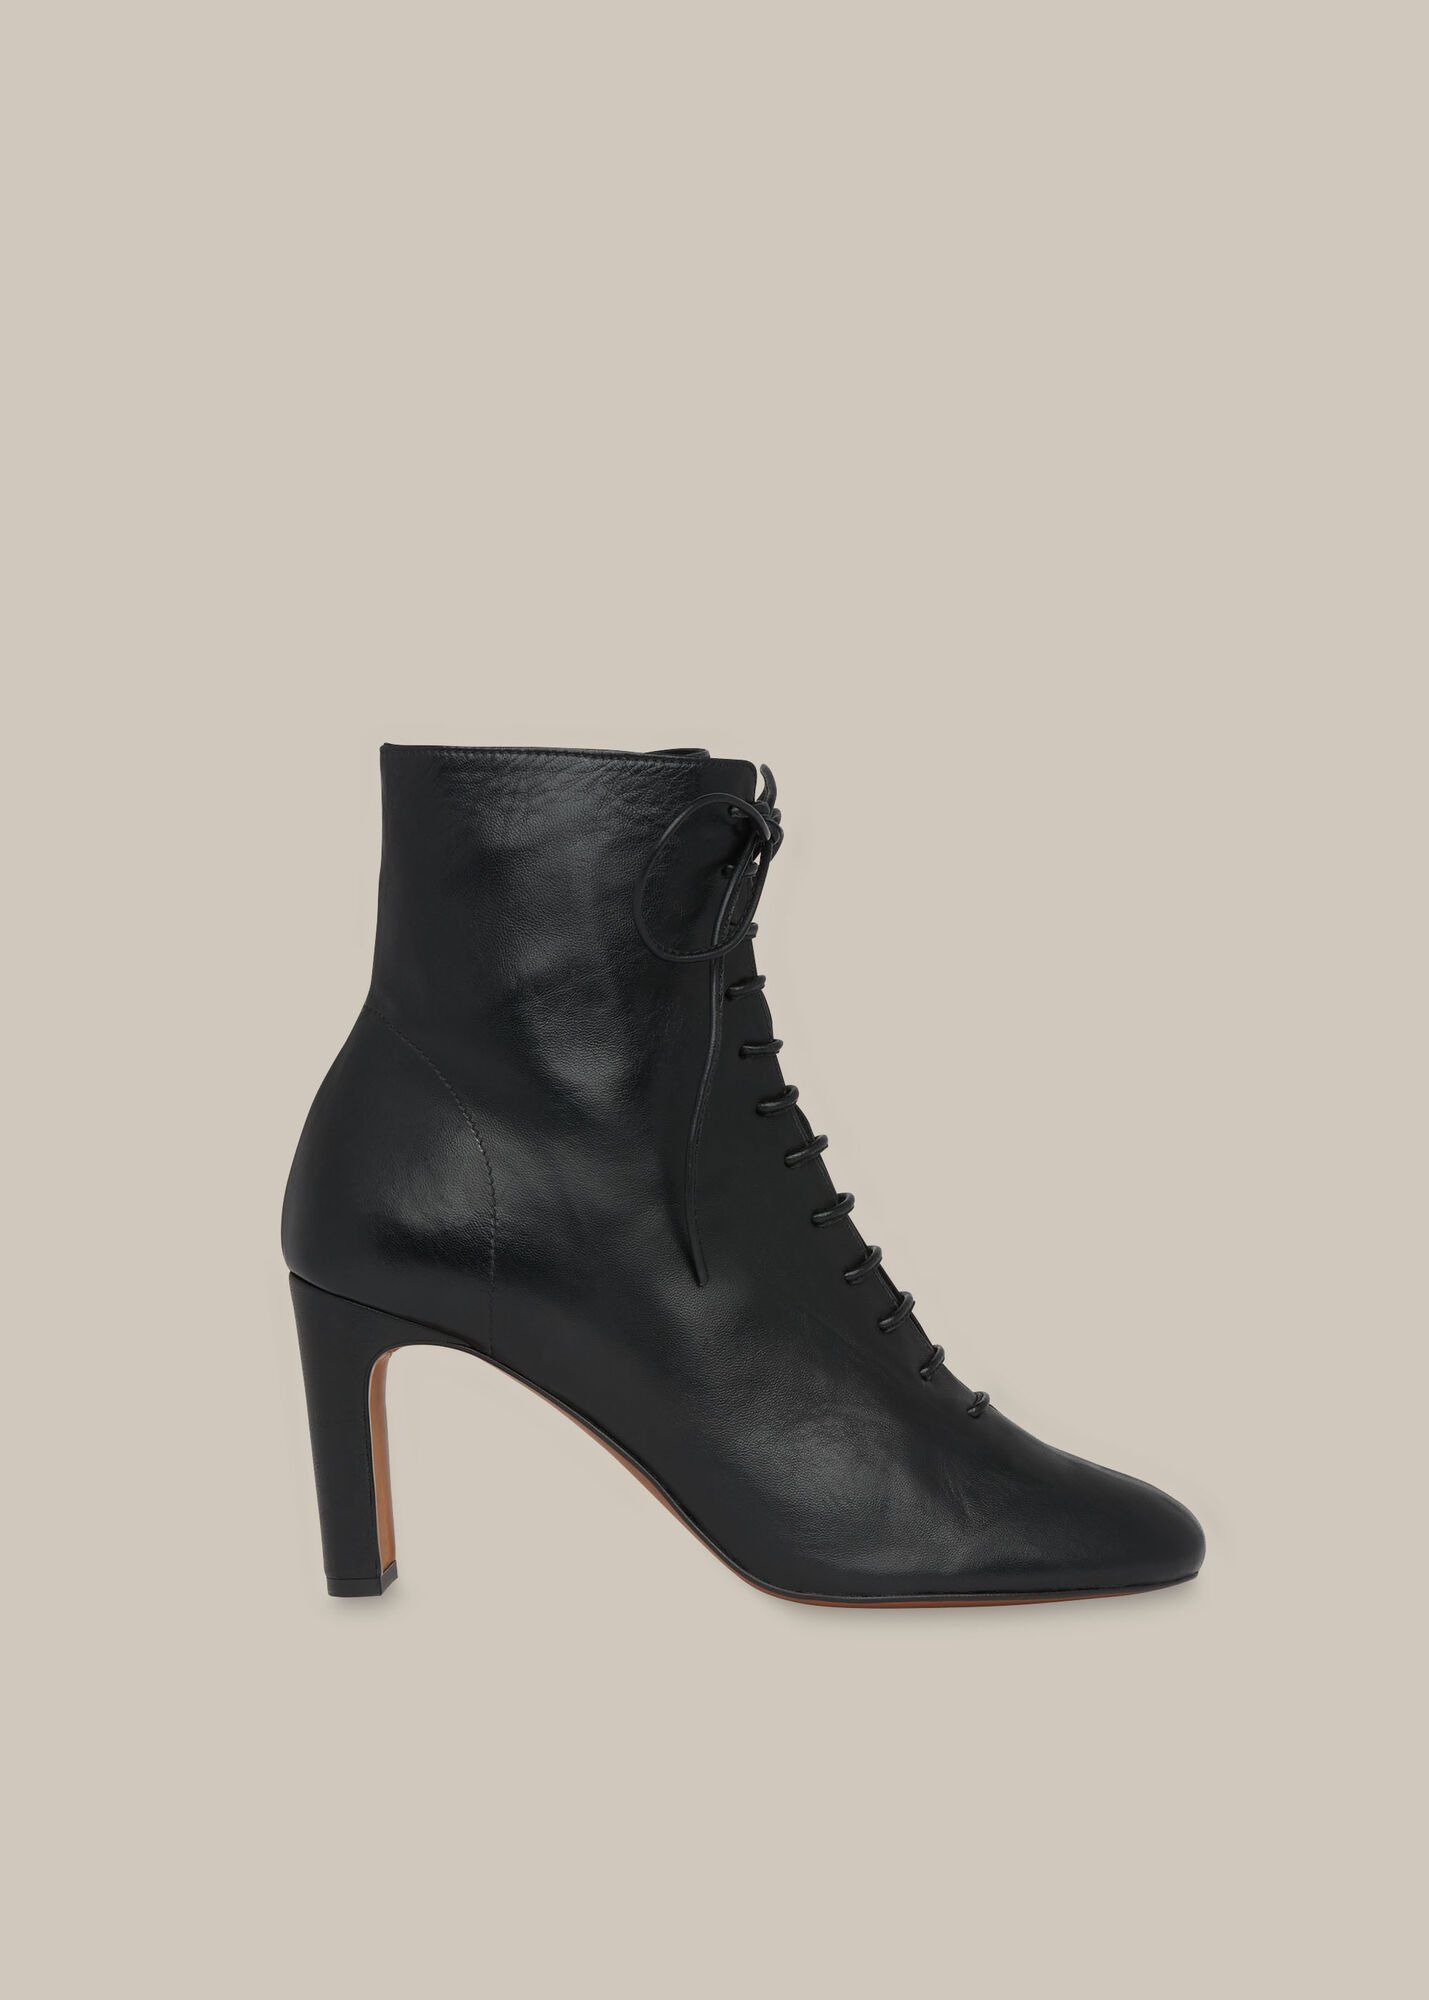 perfect black ankle boots